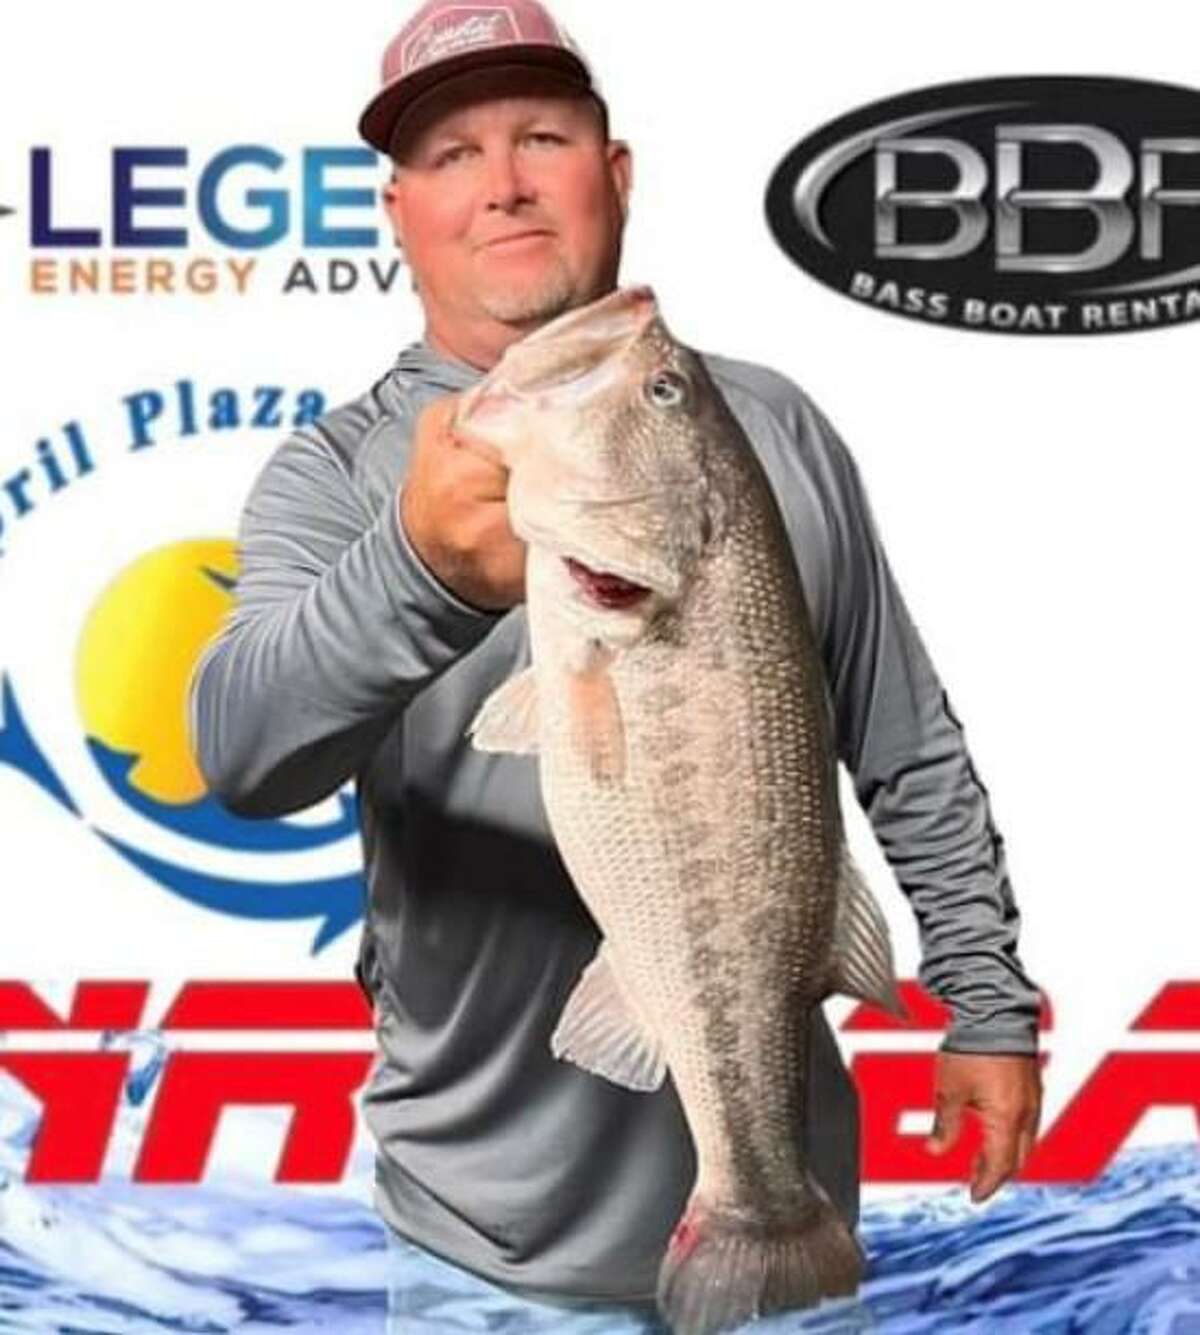 Tommy Baker won first place in the CONROEBASS Thursday Big Bass Tournament with a bass weight of 8.03 pounds.